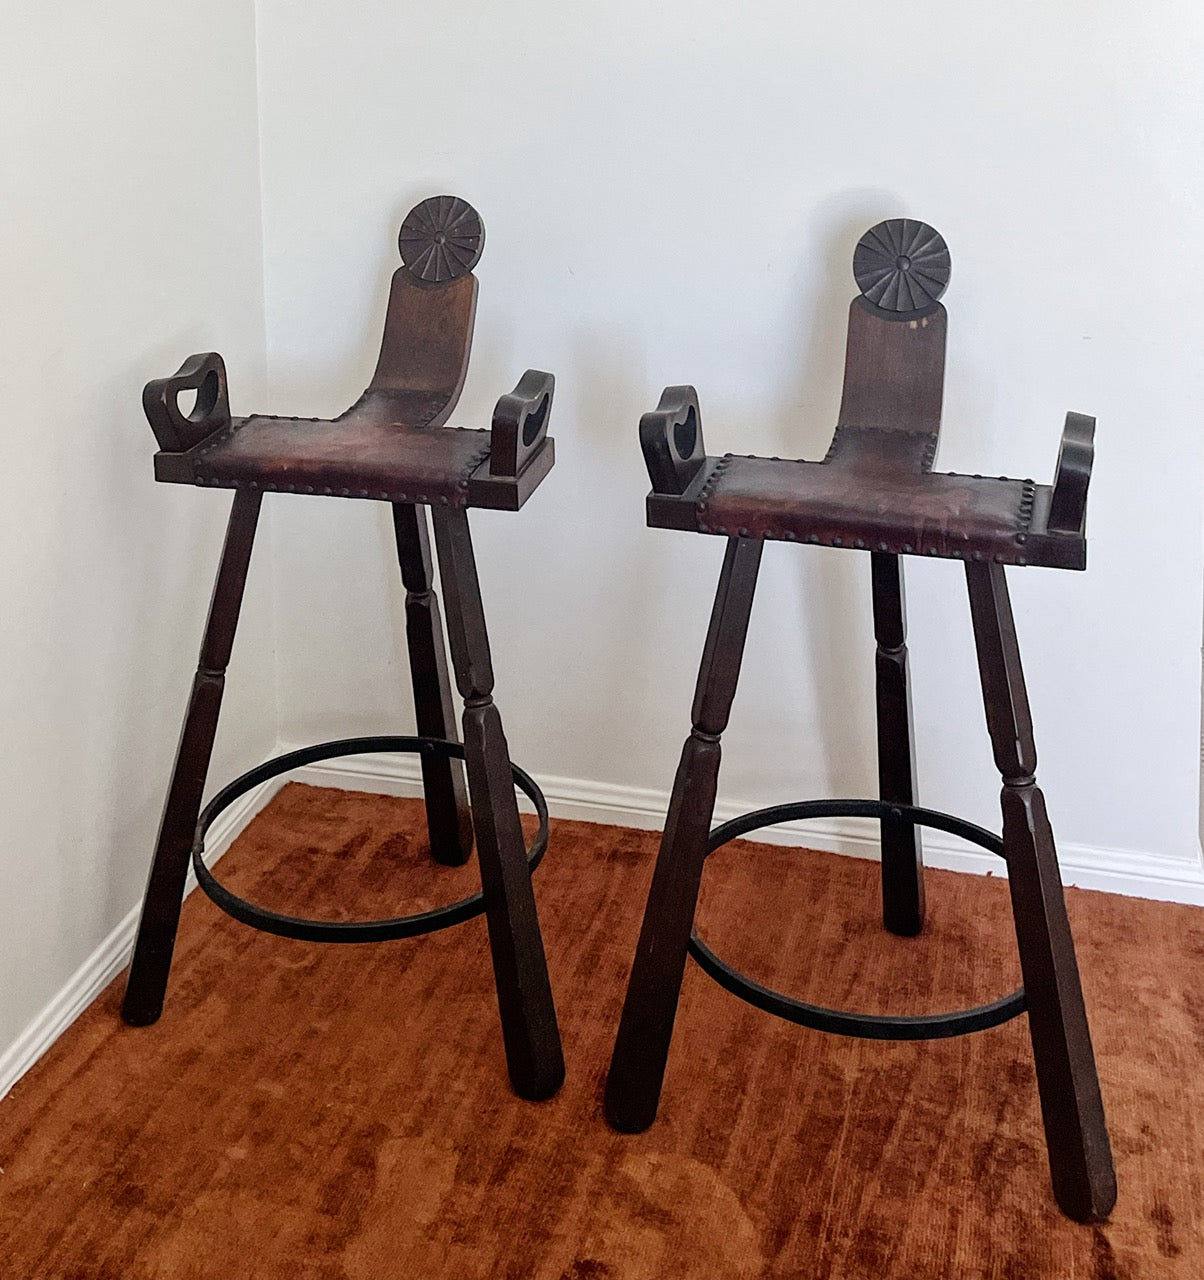 - Vintage Marbella Stools - Two Available